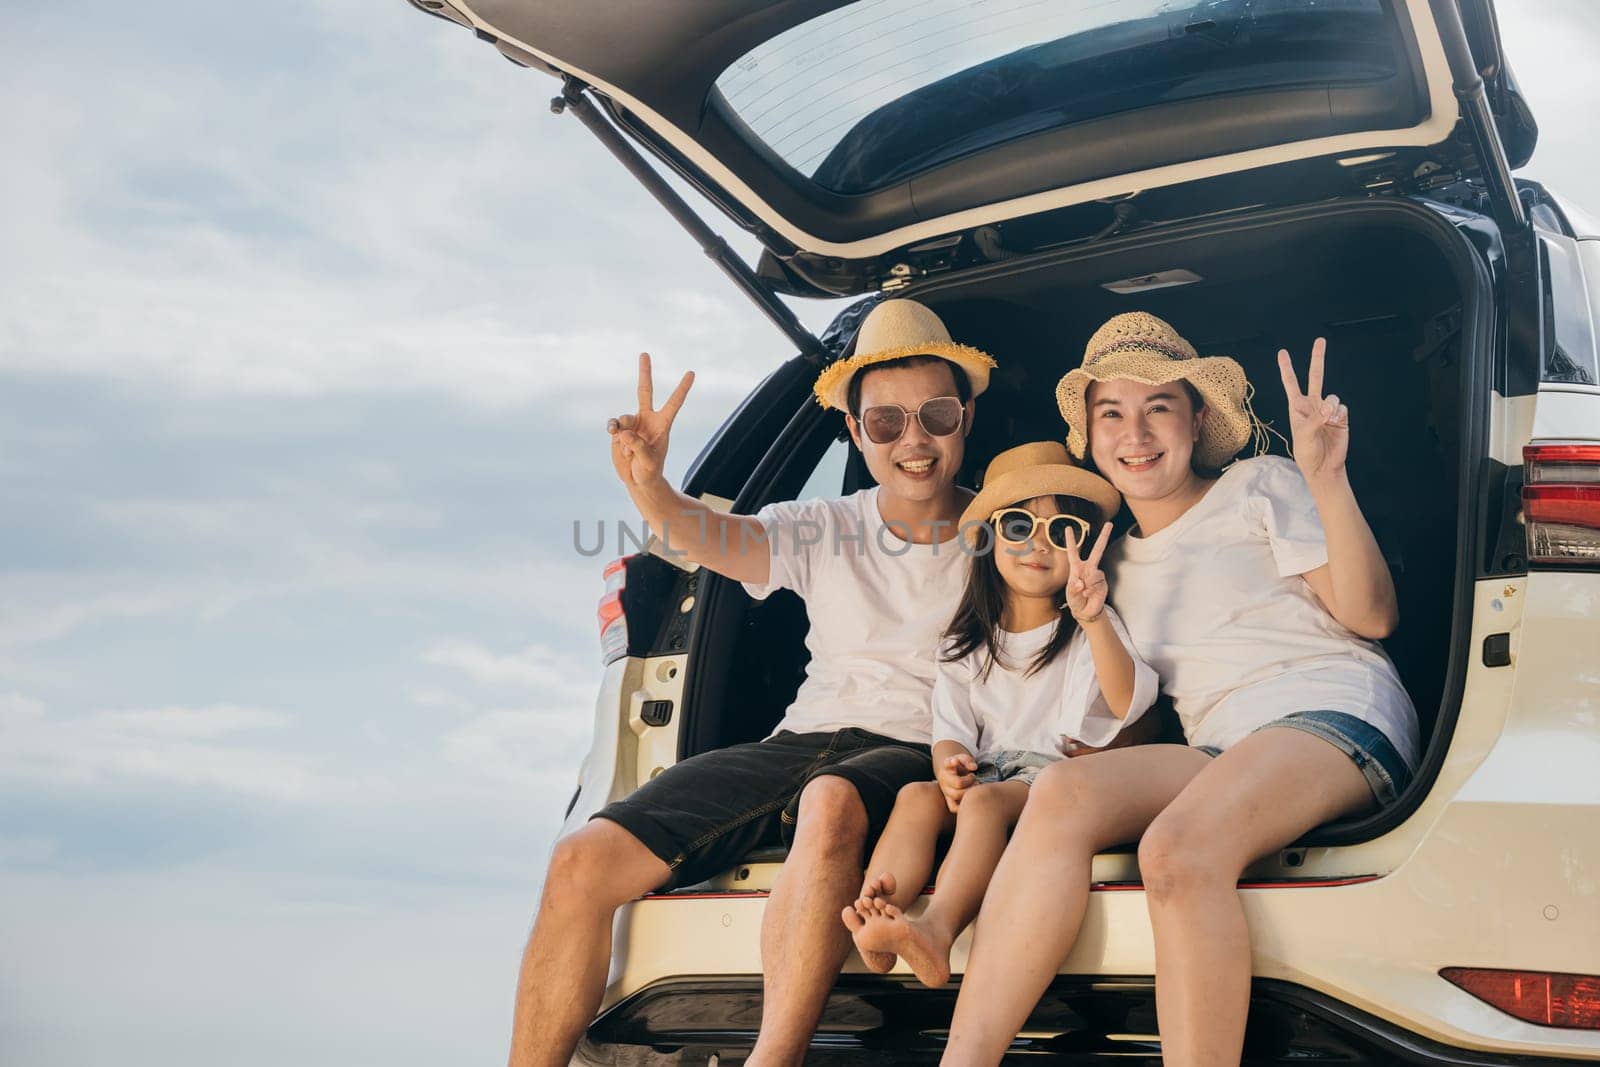 Family Day. Happy people having fun in summer vacation on beach, Family traveling in holiday at sea beach, Dad, mom and children daughter enjoying road trip sitting on back car showing V-sign signal